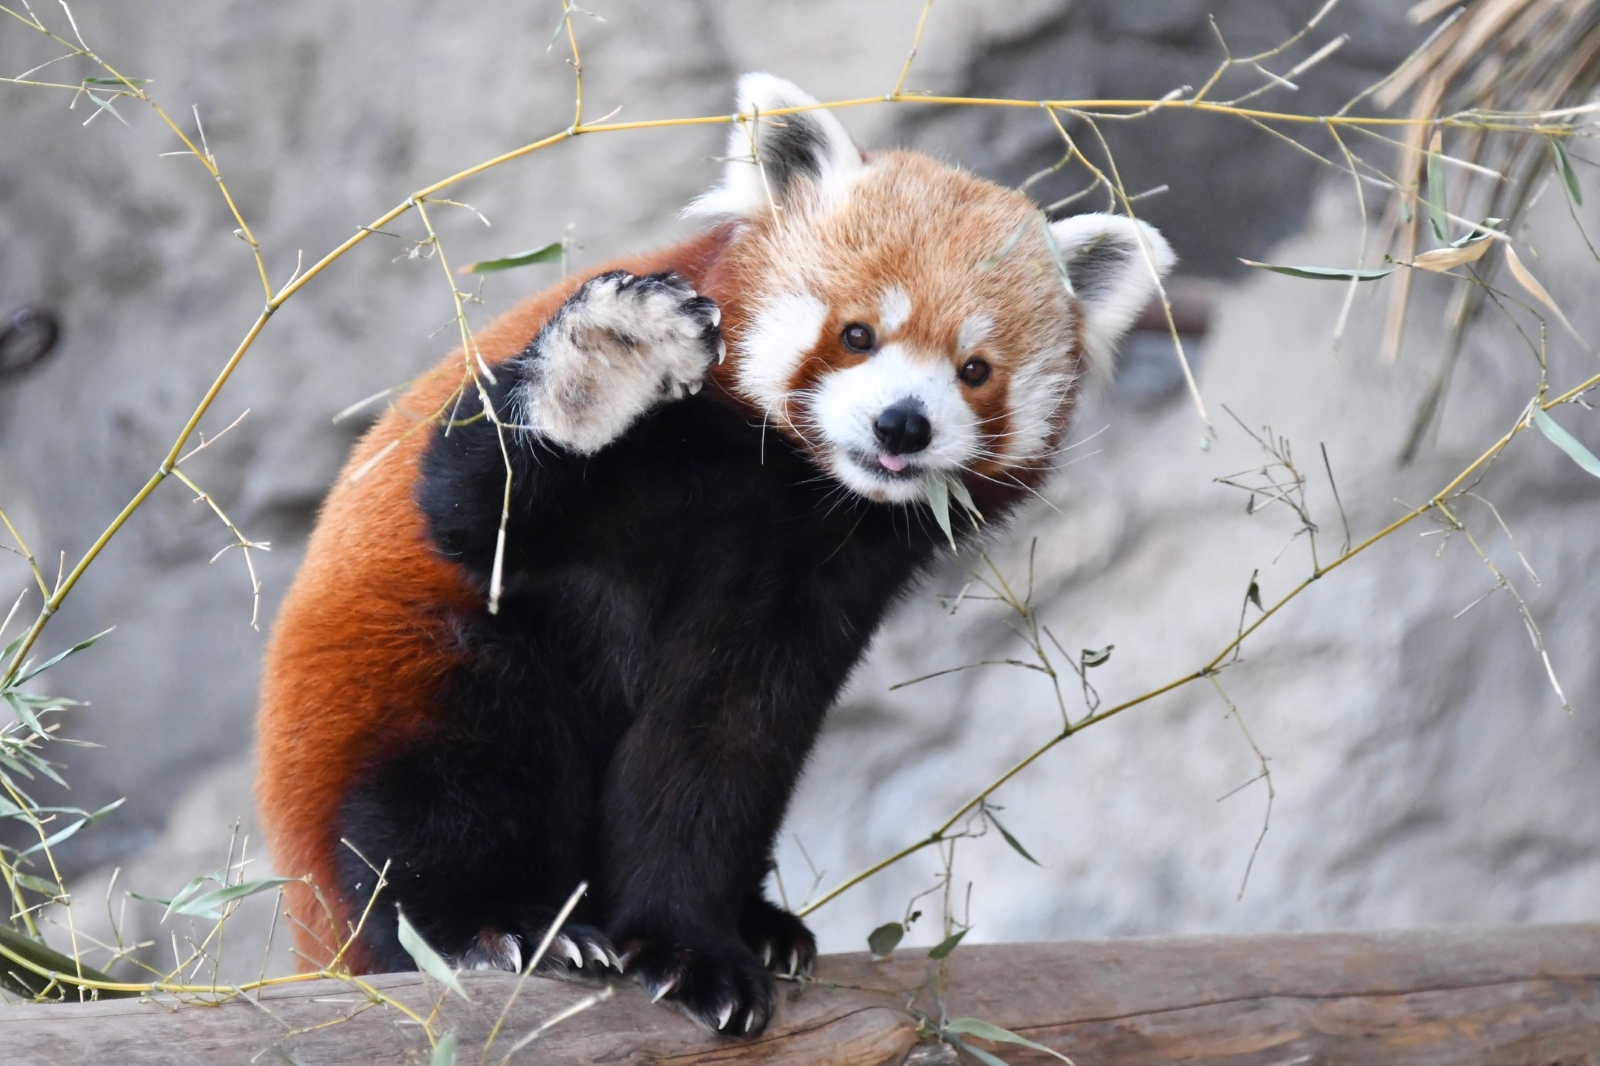 A red panda at the St. Louis Zoo